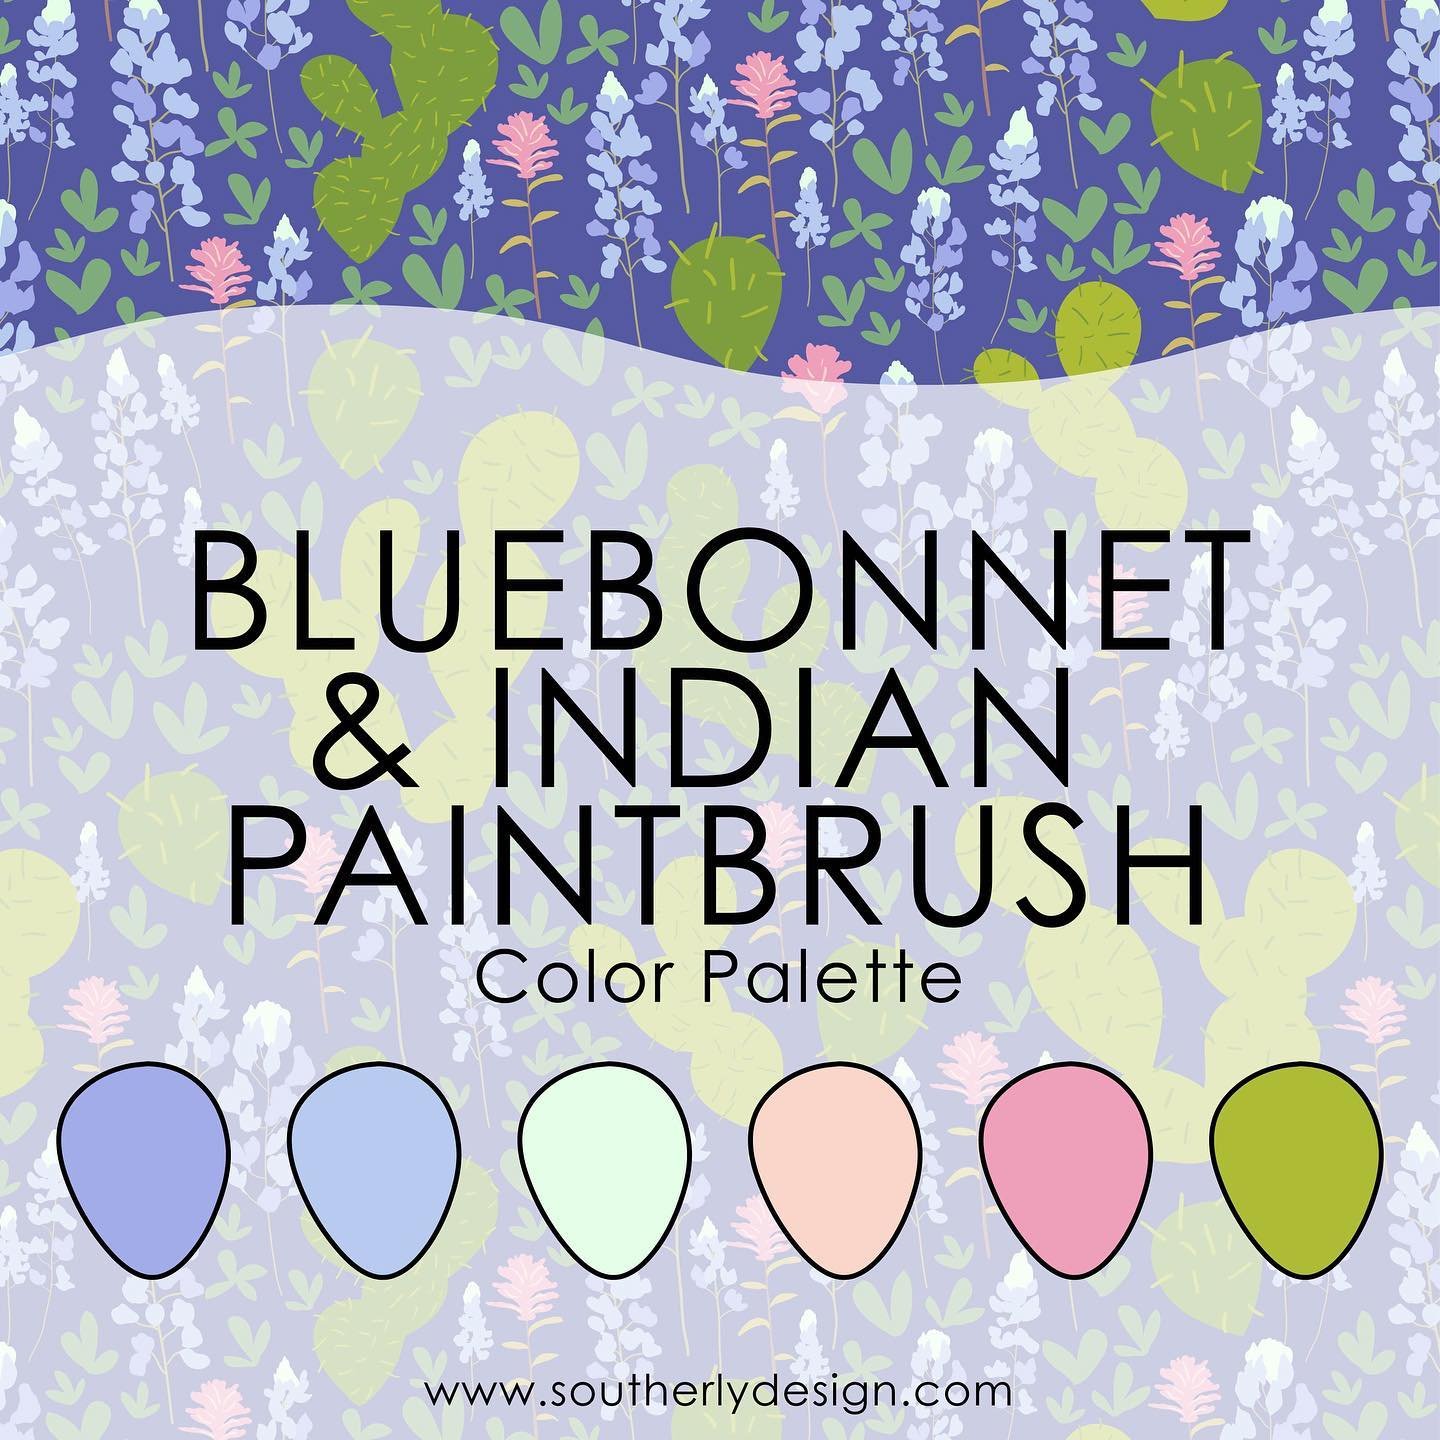 This is one of my favorite color palettes 🎨  This pattern is in my Spoonflower shop! Link in bio to shop. 

#bluebonnetseason #bluebonnets #colorstory #colorpaletteinspiration #designinspiration❤️ #designinspire #colortheory #colorsilove #colorparty